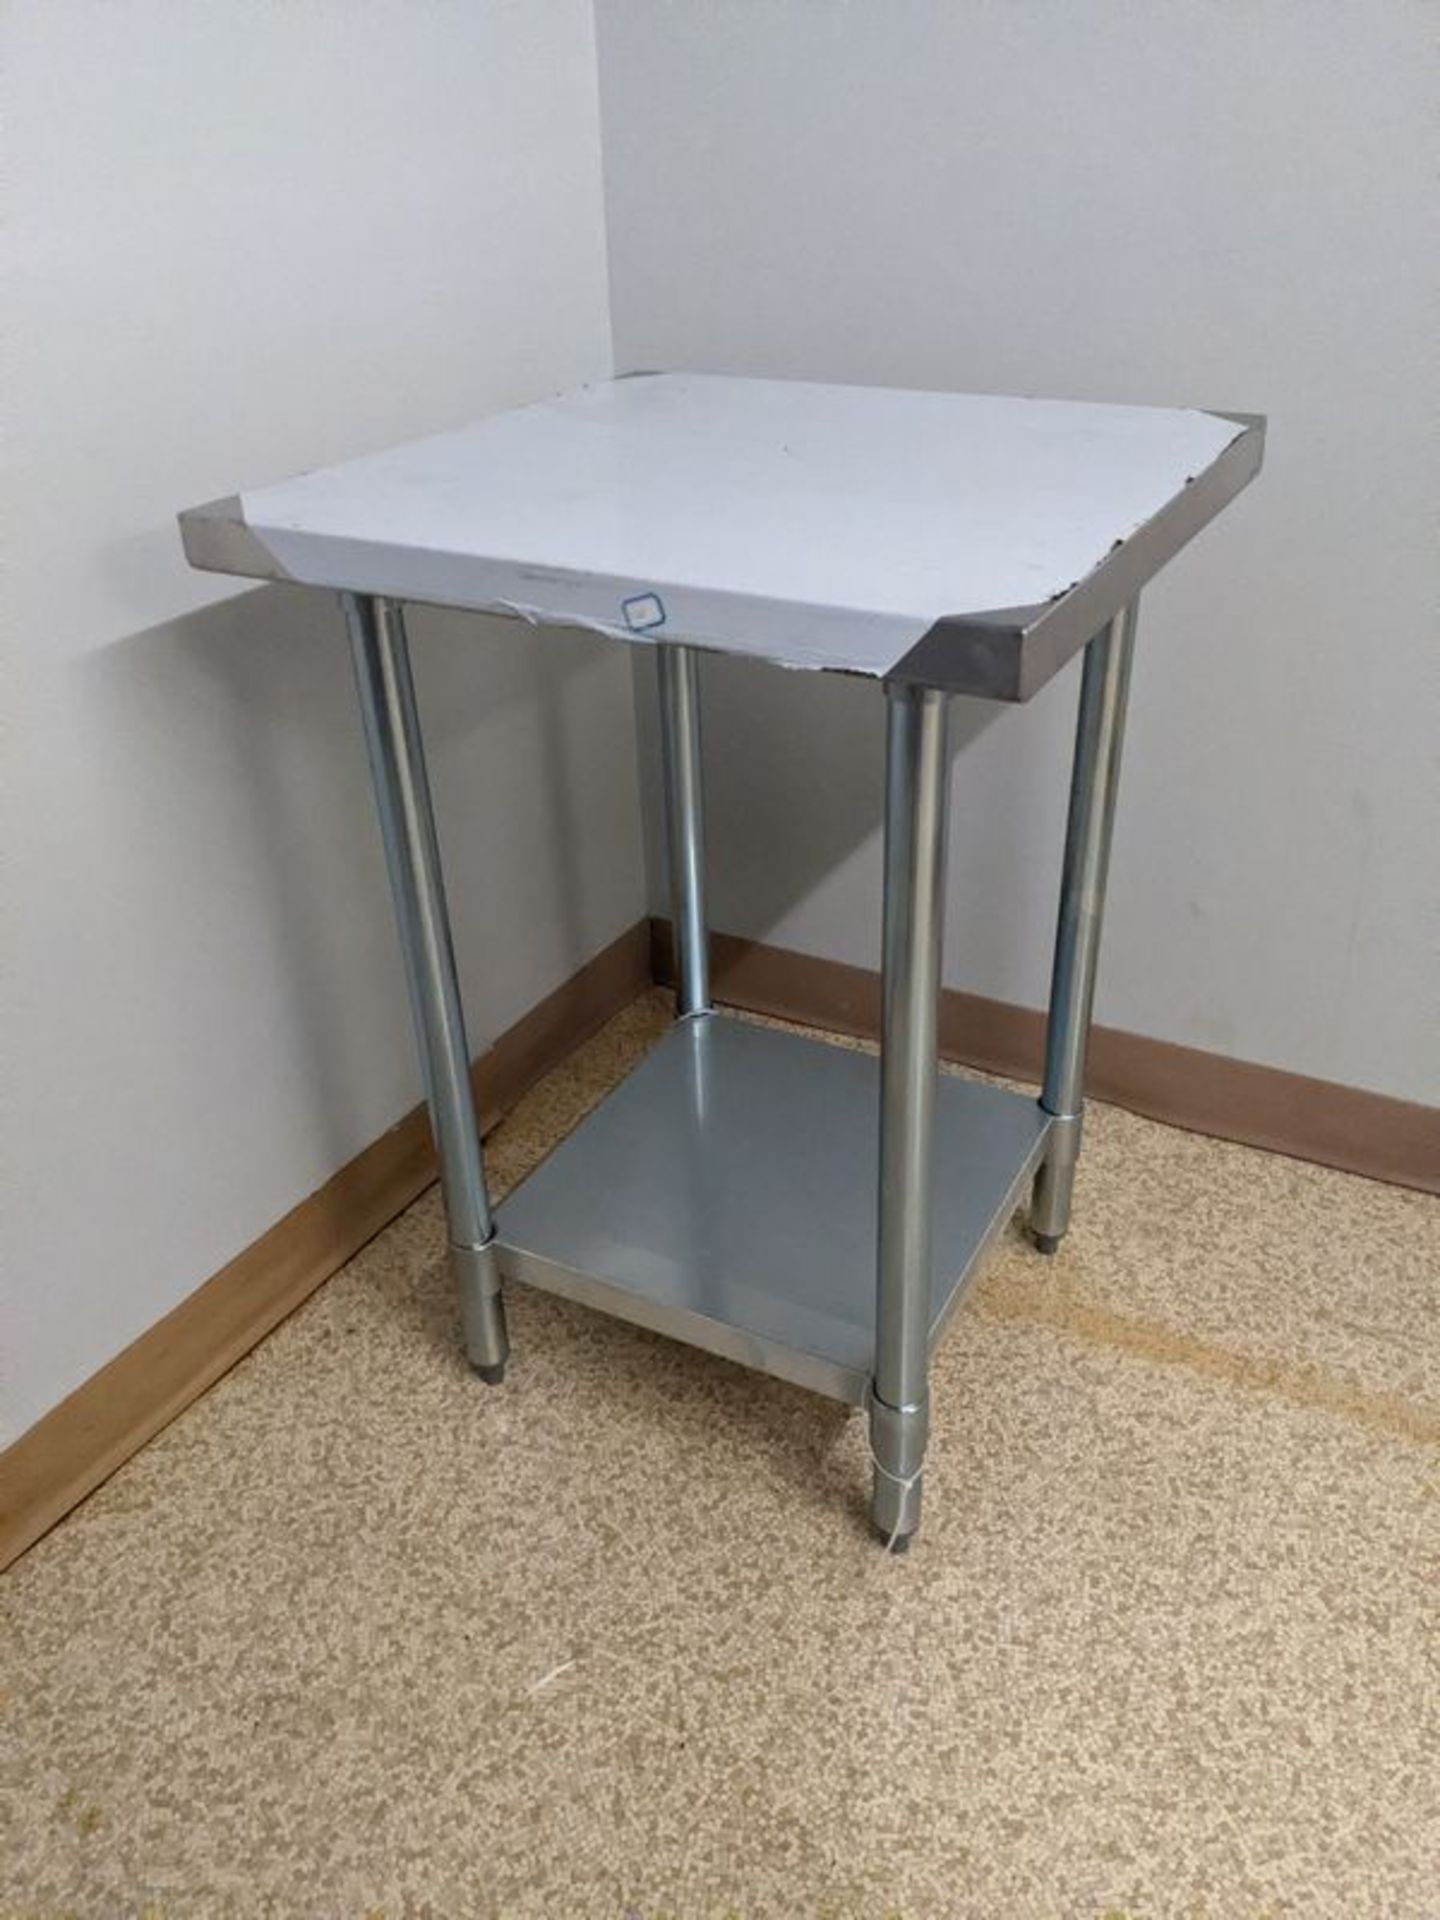 New 24 x 24" Stainless Steel Table - In Box